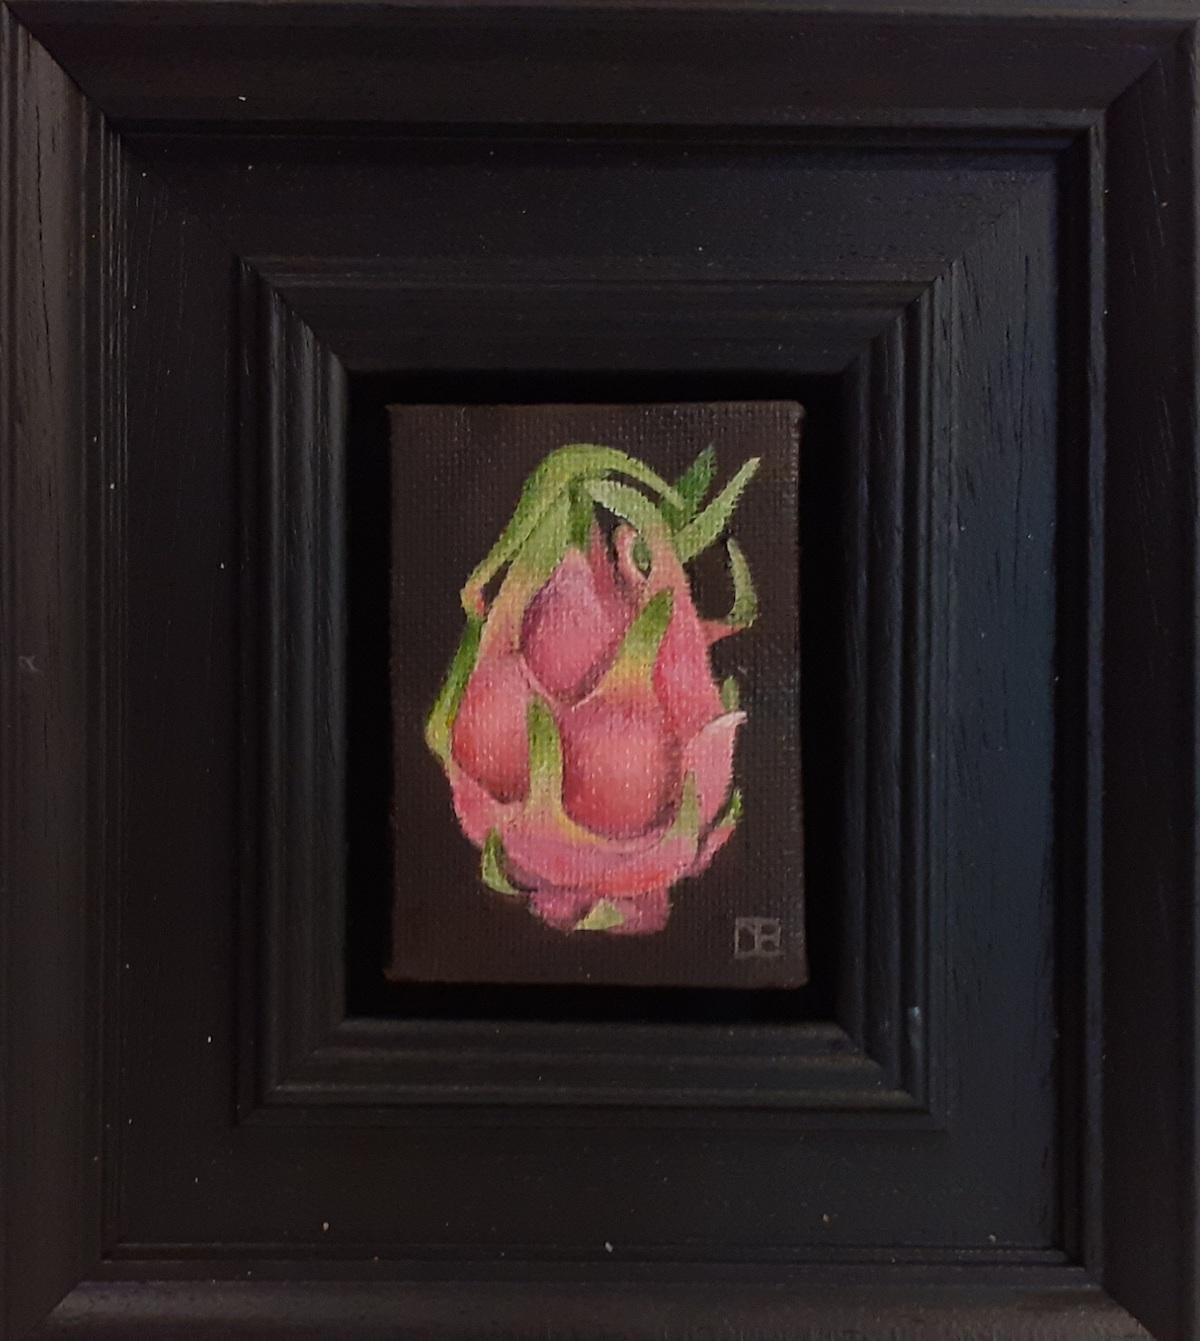 Pocket Dragonfruit by Dani Humberstone,  Contemporary oil painting, original art